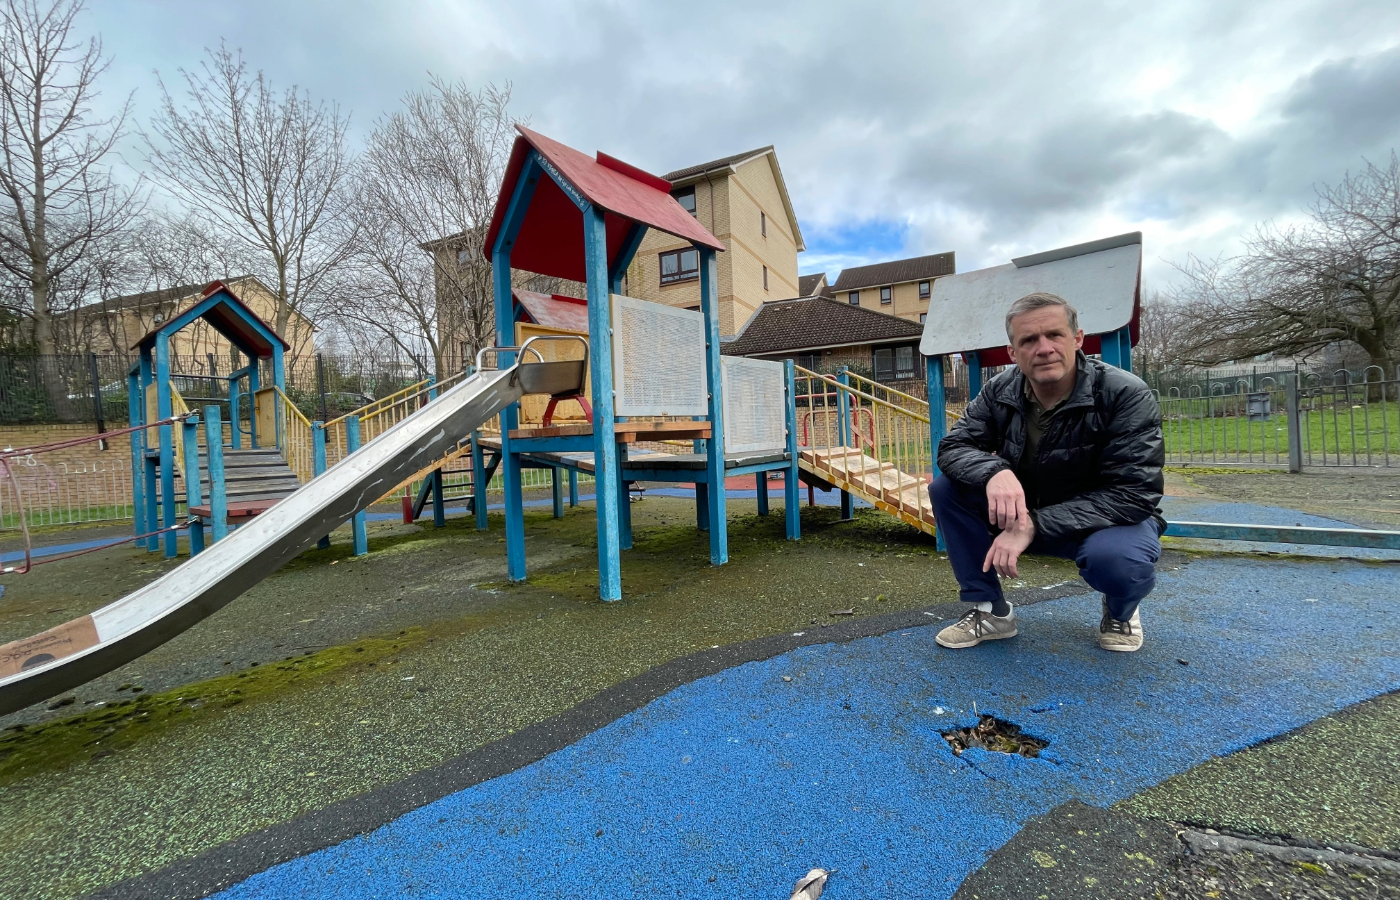 Councillor Christopher Cowdy at the play area in Stateford’s Moat Drive.